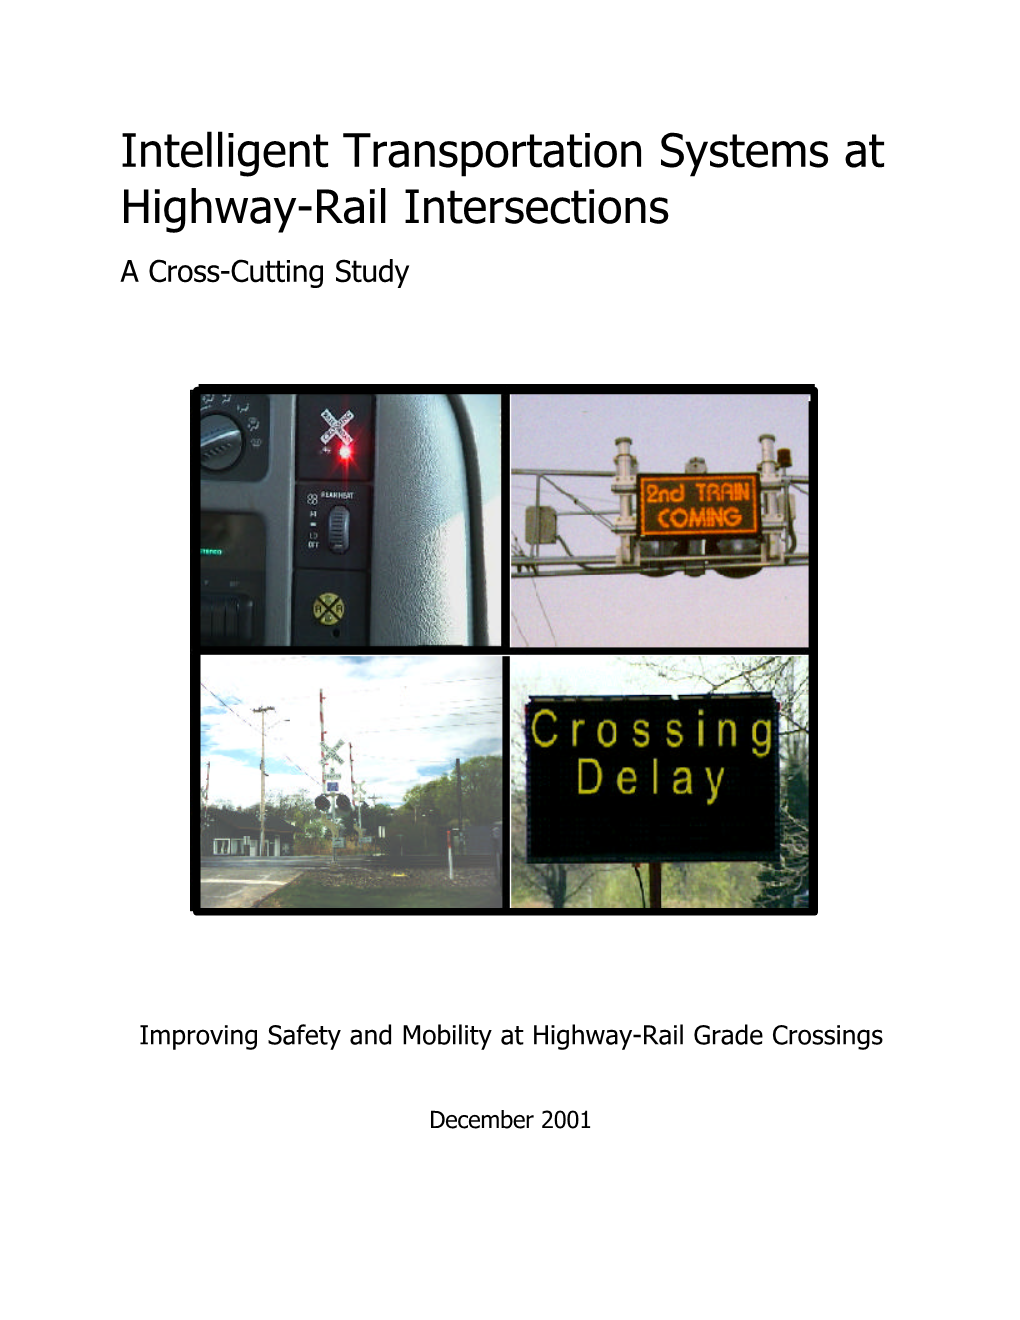 Intelligent Transportation Systems at Highway-Rail Intersections a Cross-Cutting Study